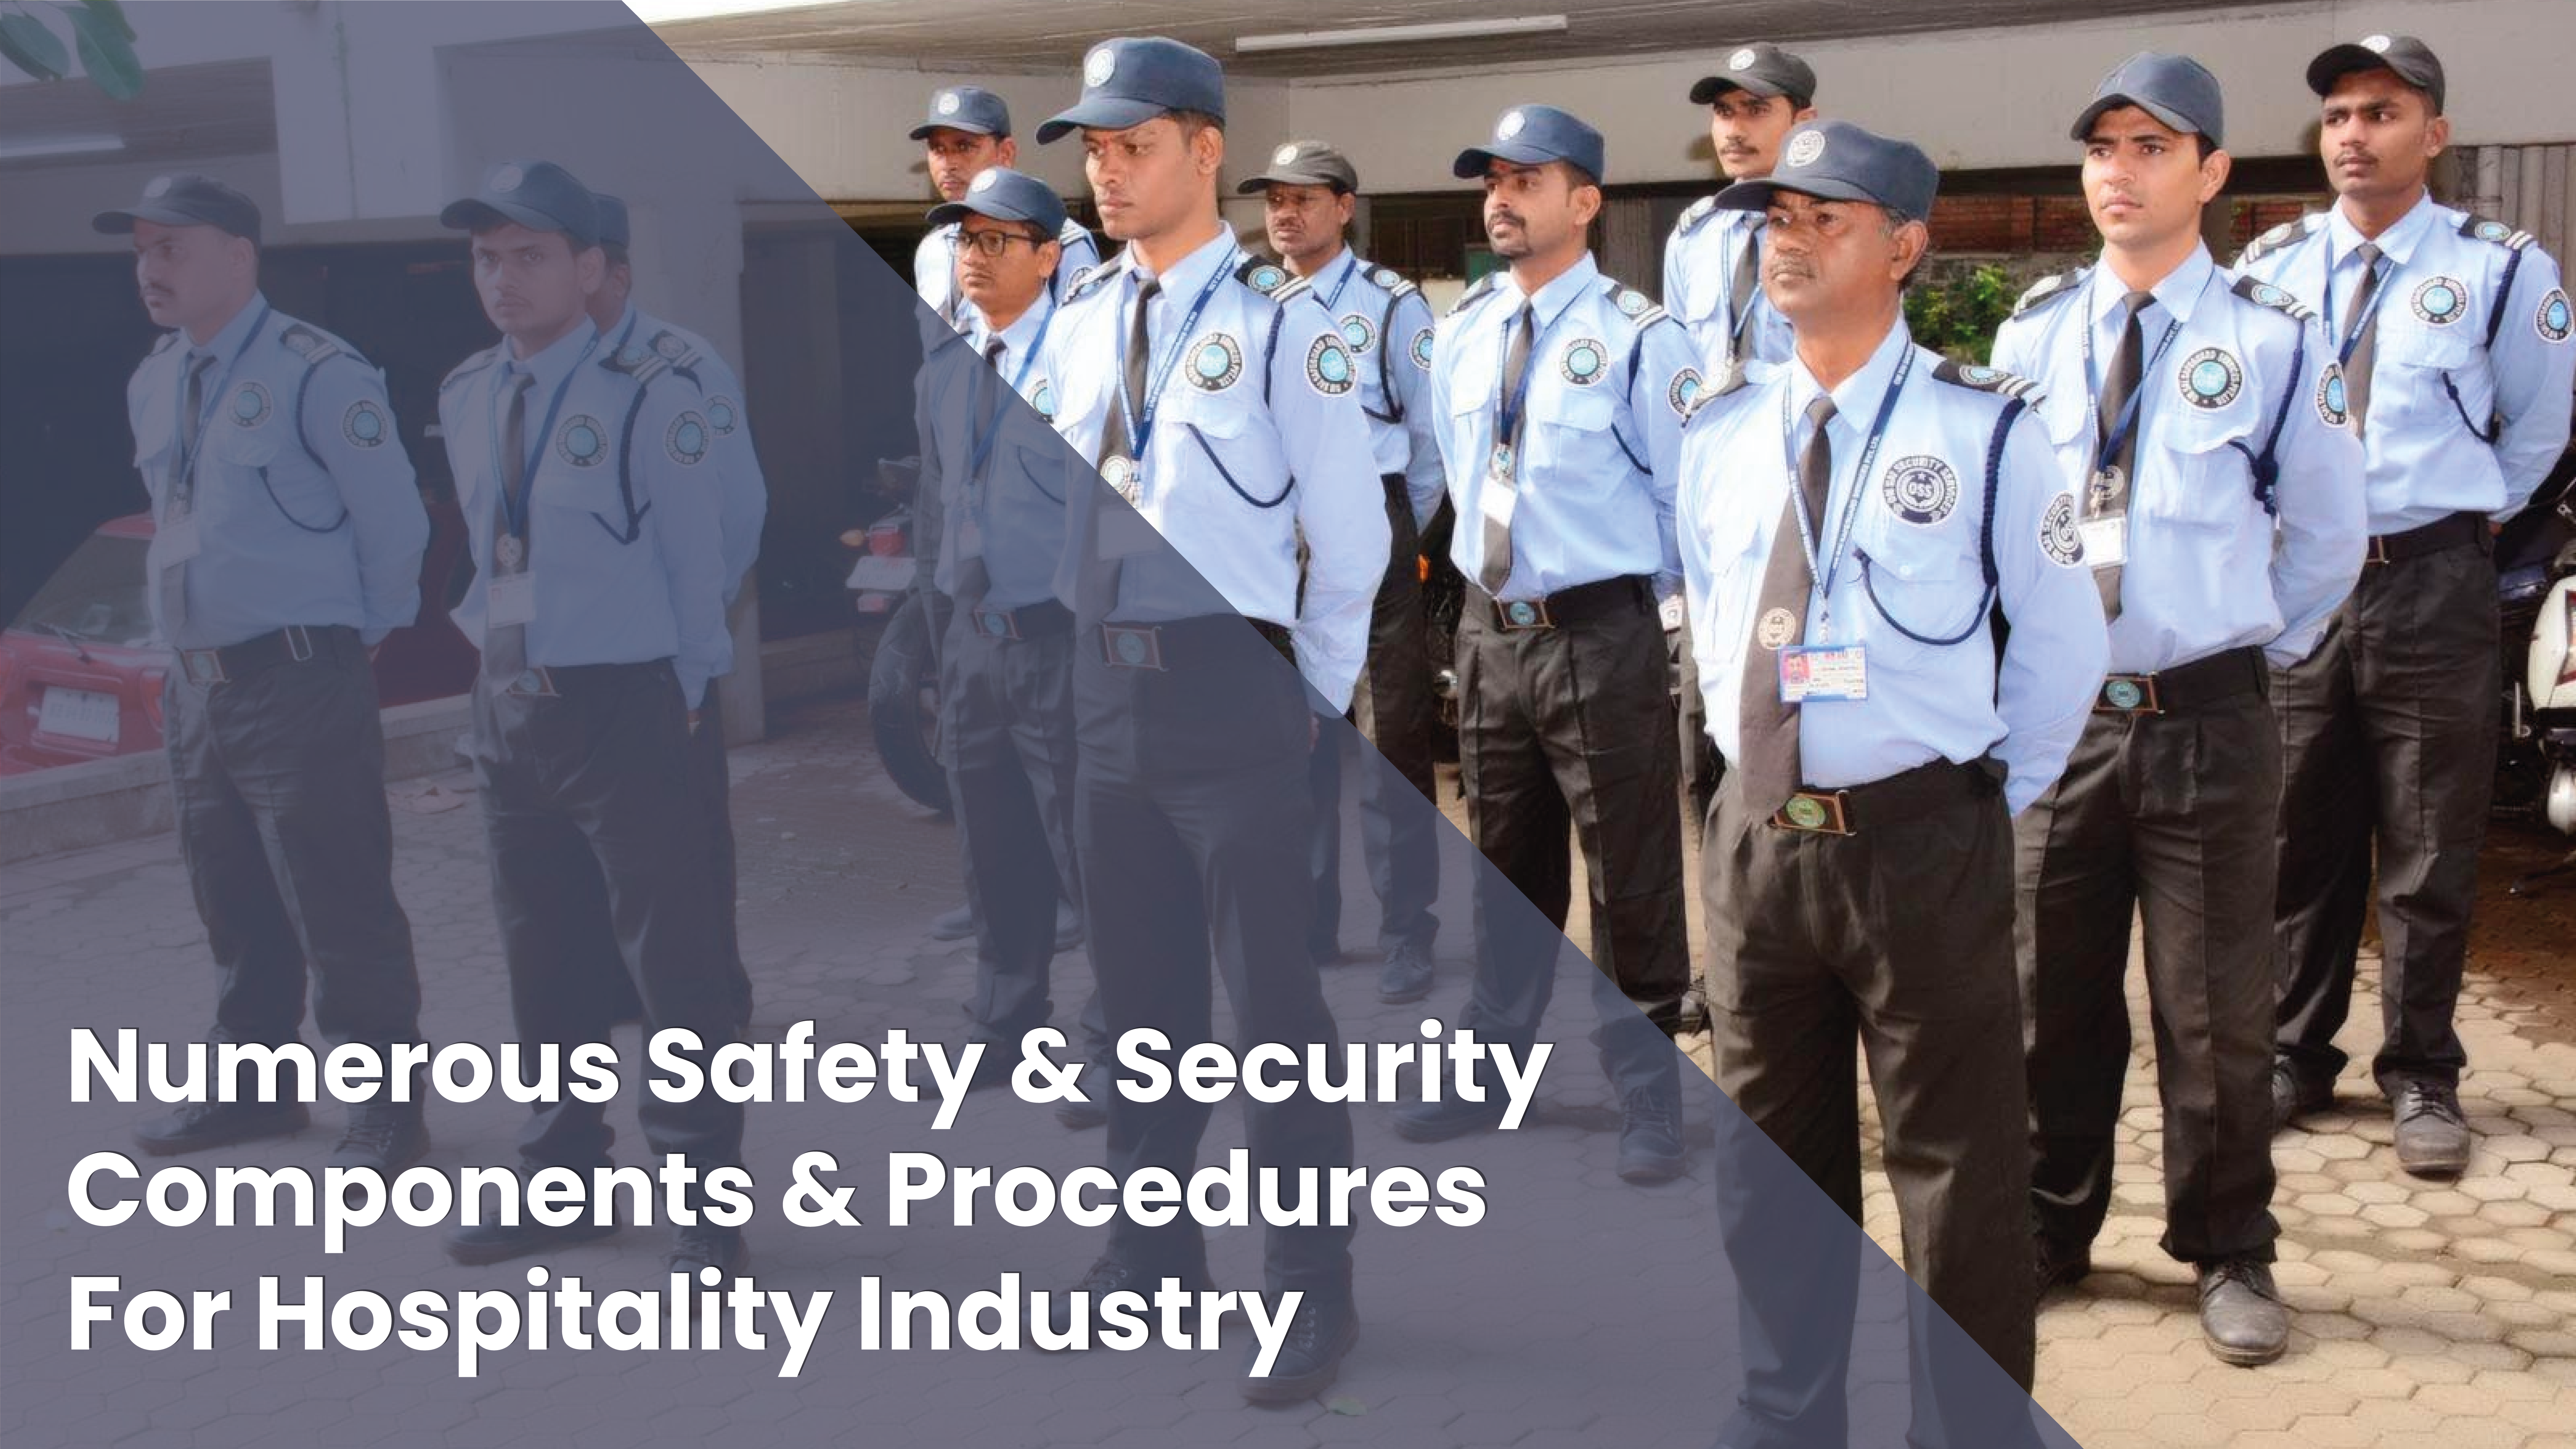 Numerous Safety & Security Components & Procedures For Hospitality Industry